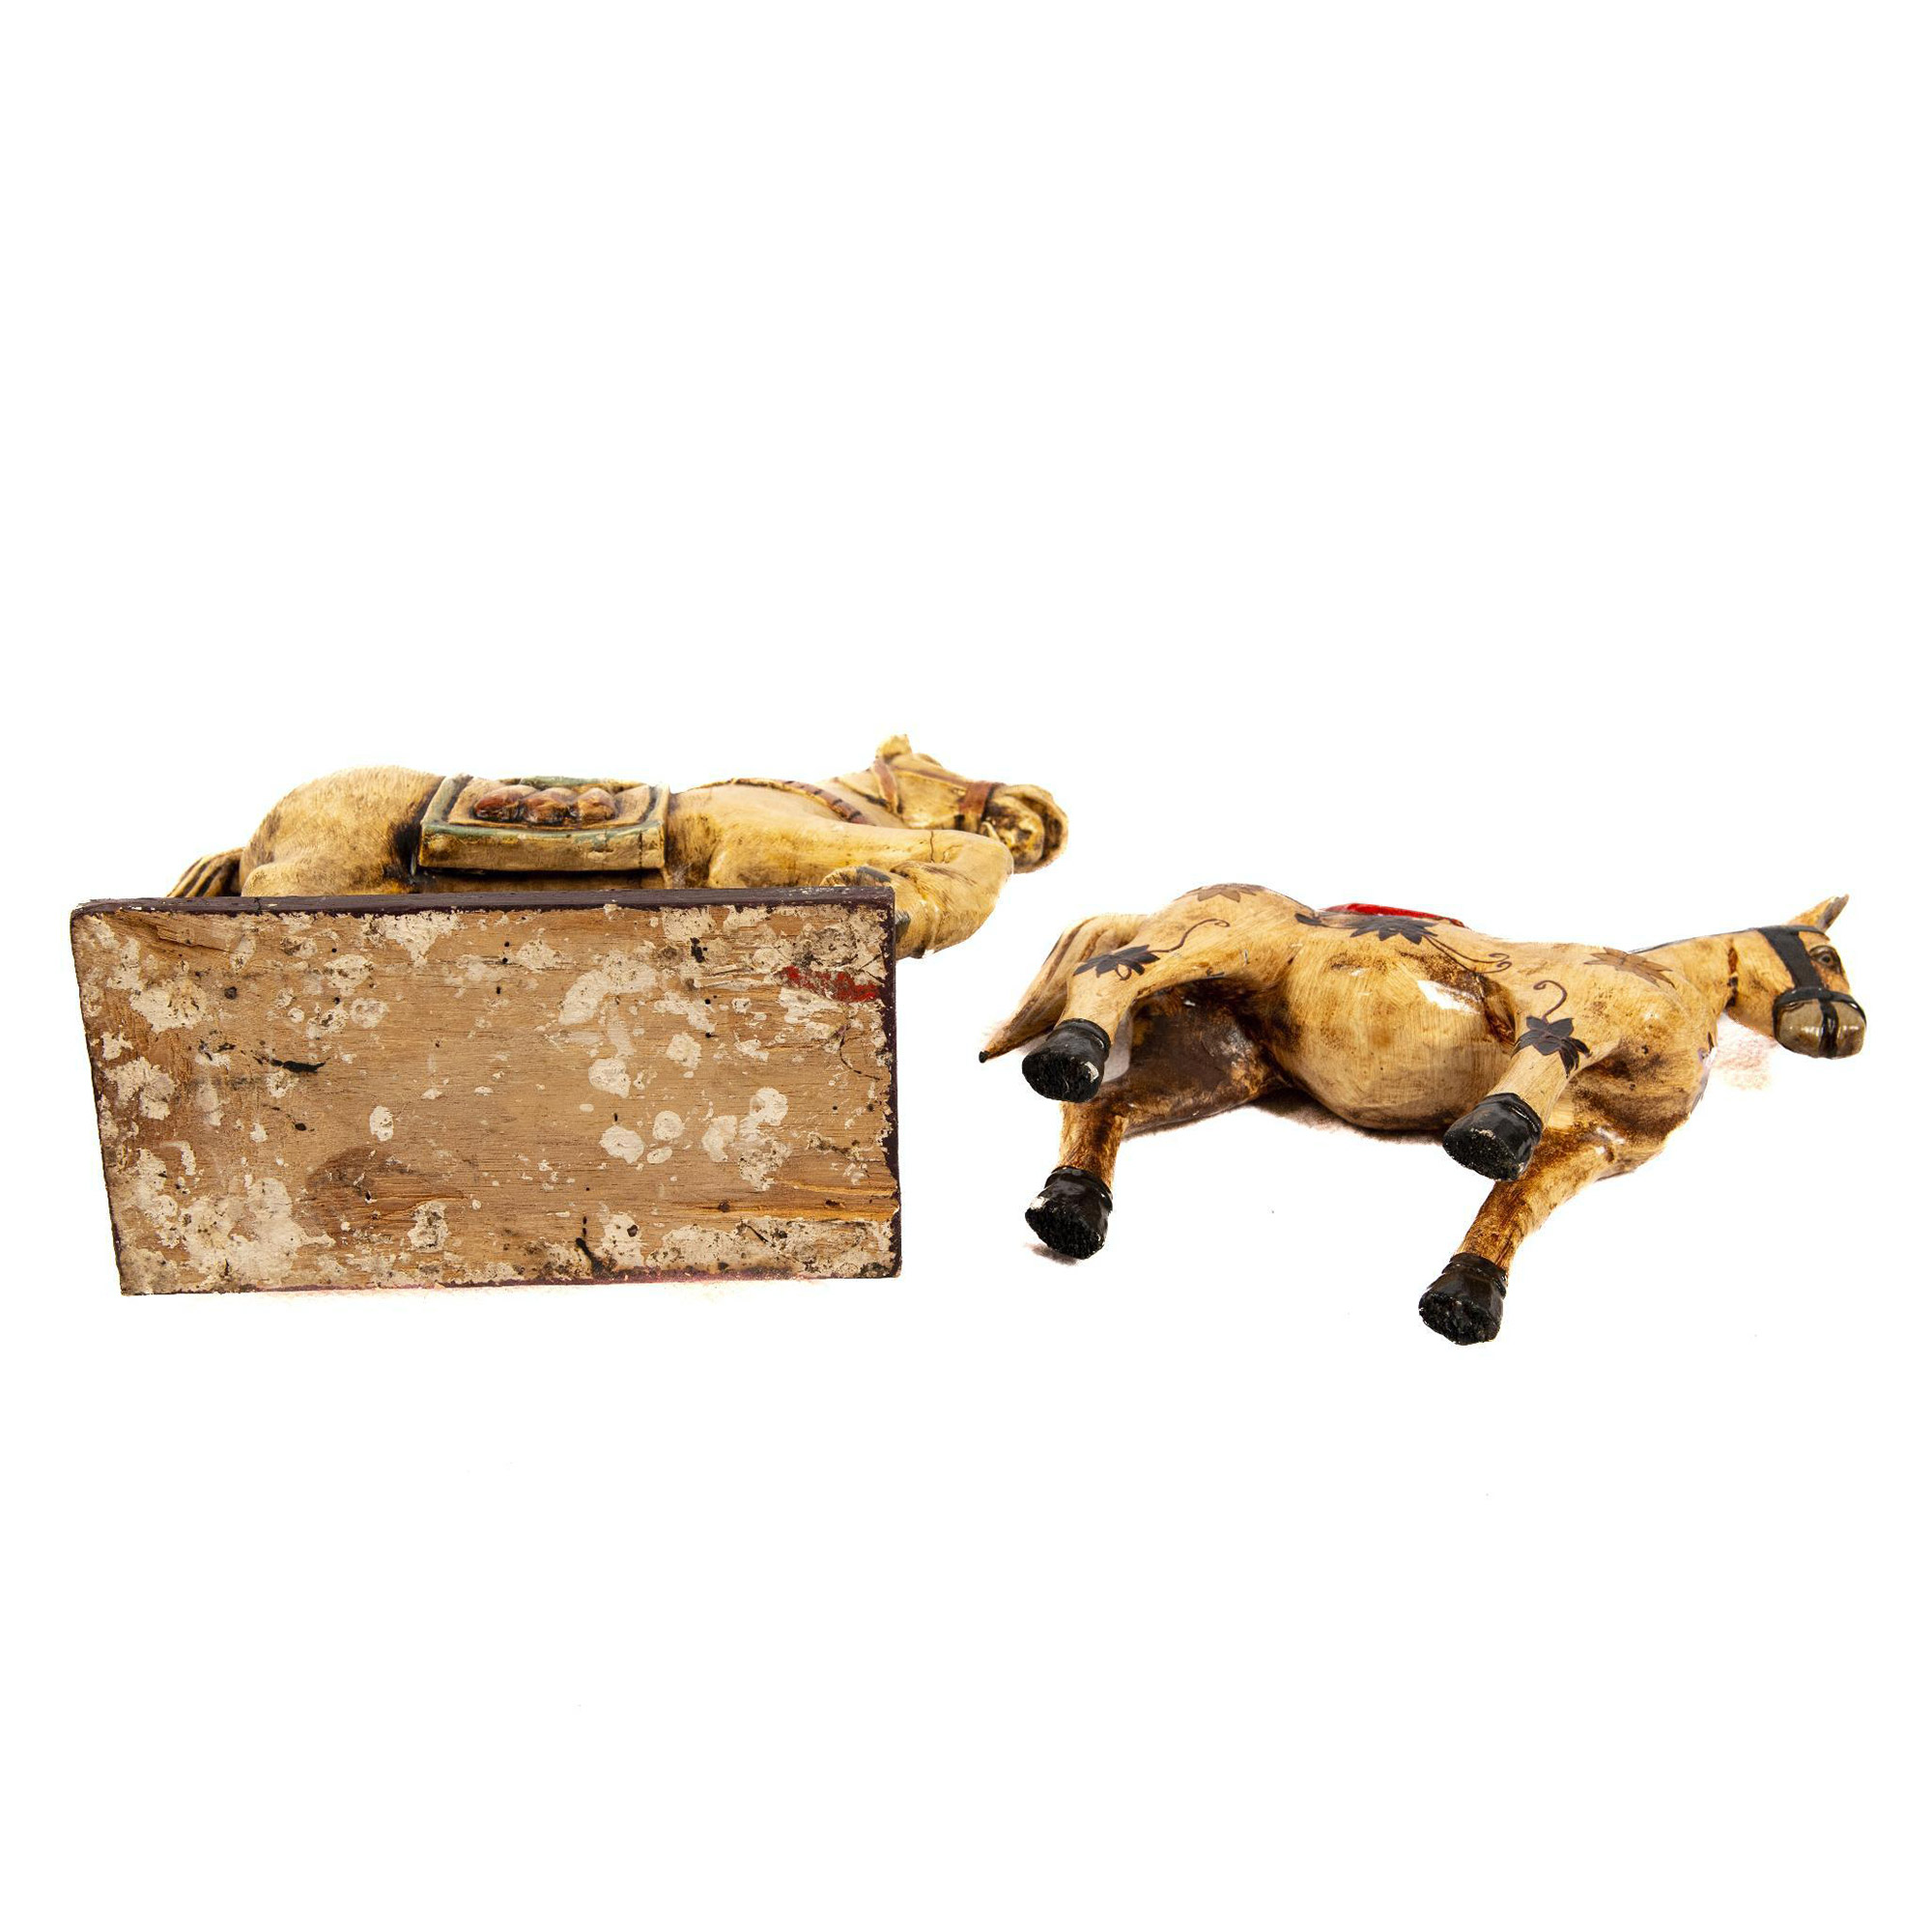 Pair of Decorative Painted Wooden Horses - Image 5 of 5